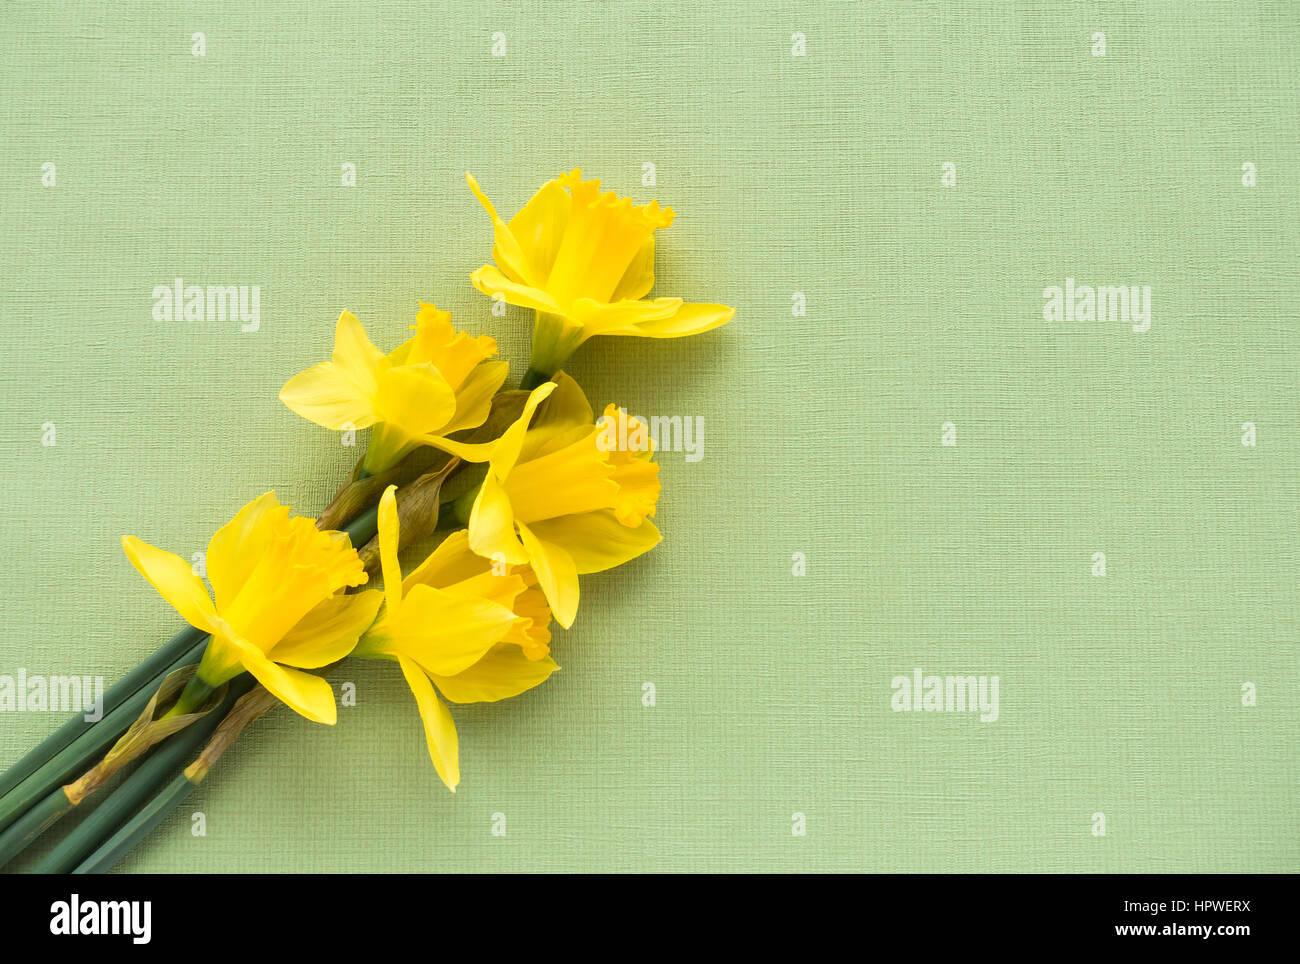 Arrangement of five fresh yellow Jersey Pride daffodils lying on soft pale green textured background with lots of copy space. Stock Photo